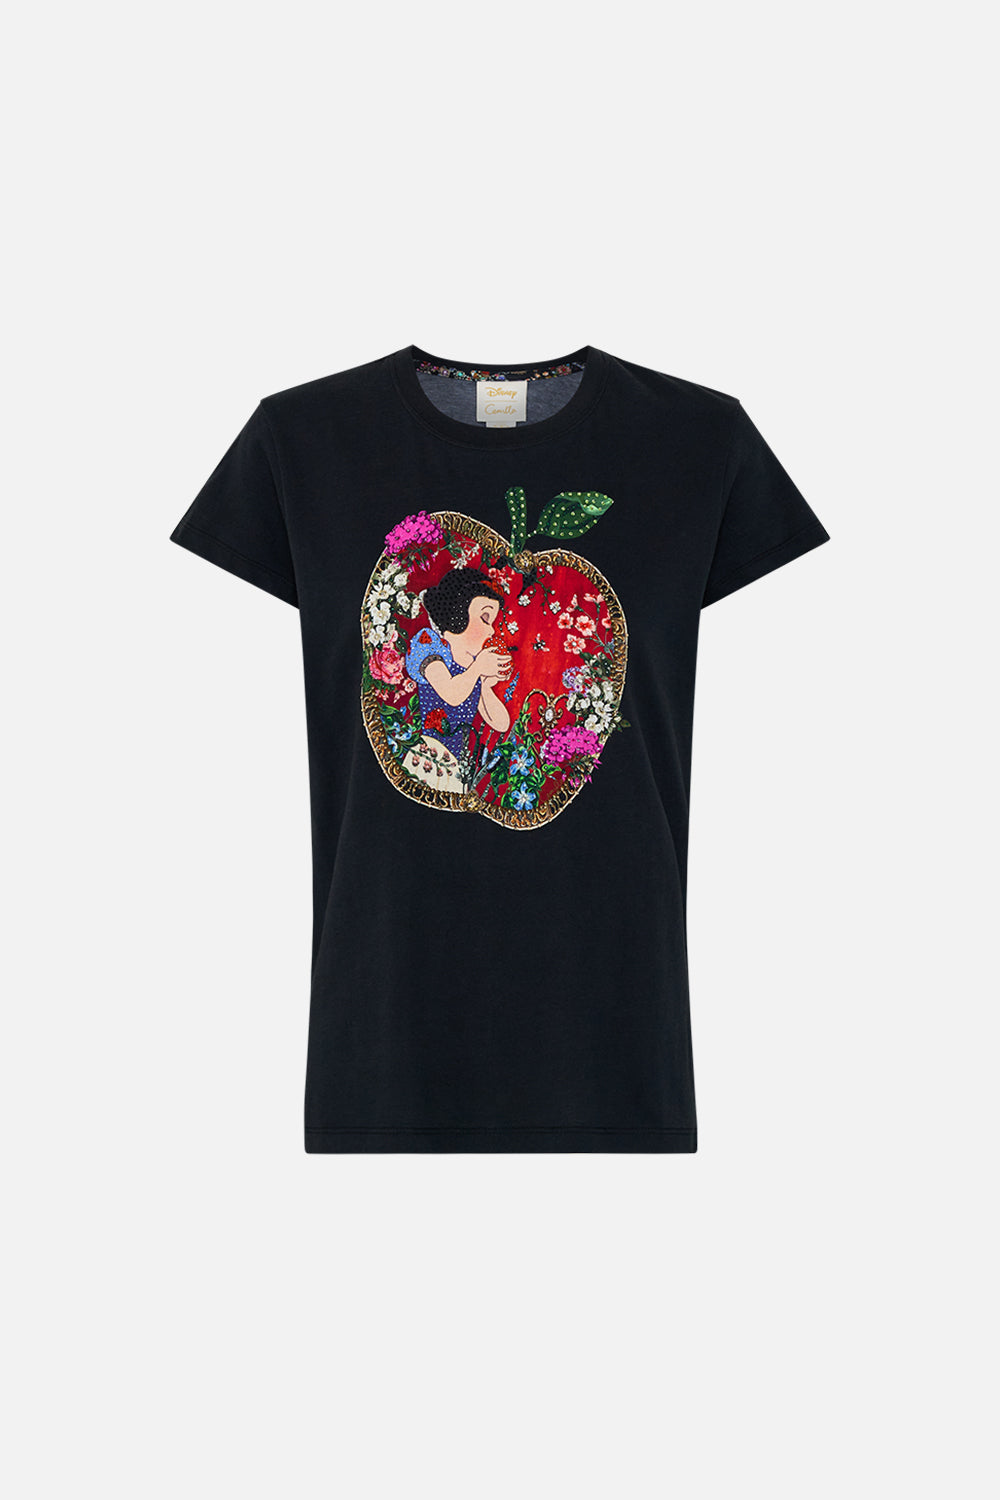 Disney CAMILLA slim fit graphic tee in Happily Ever After print